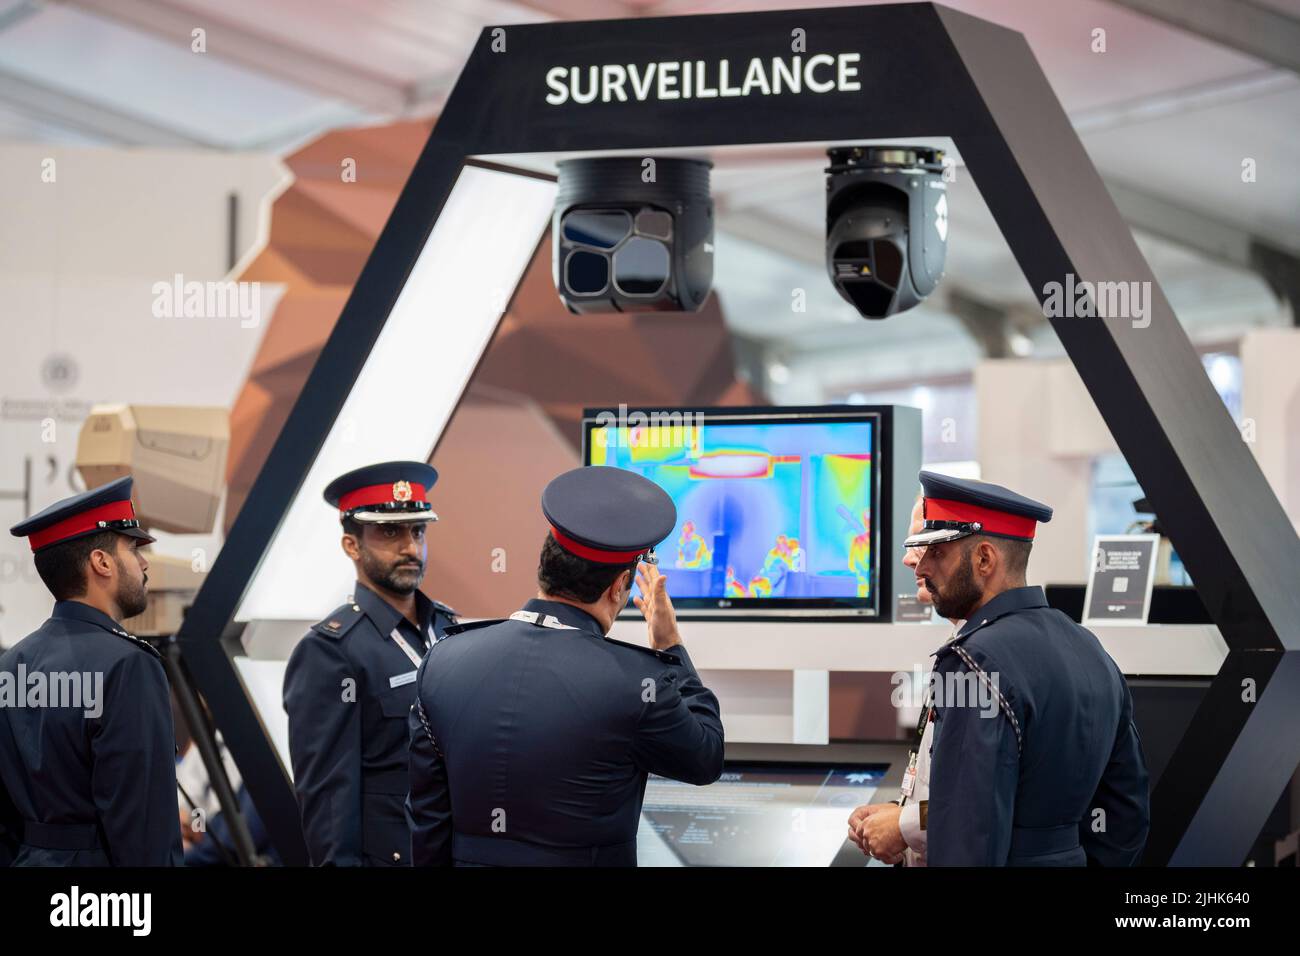 Foreign military officers discuss technology in front of Thermal Imaging surveillance cameras and screen by 'Teledyne FLIR' at the Farnborough Airshow, on 18th July 2022, at Farnborough, England. Teledyne FLIR specializes in thermal imaging cameras and sensors. Its main customers are governments, The Farnborough International Airshow (FIA) is an aerospace and defence industry trade fair which, due to Covid, is being held for the first time in four years. The pandemic has had a major impact on commercial aviation, while the war in Ukraine has changed the mindset for defence industries. There ar Stock Photo